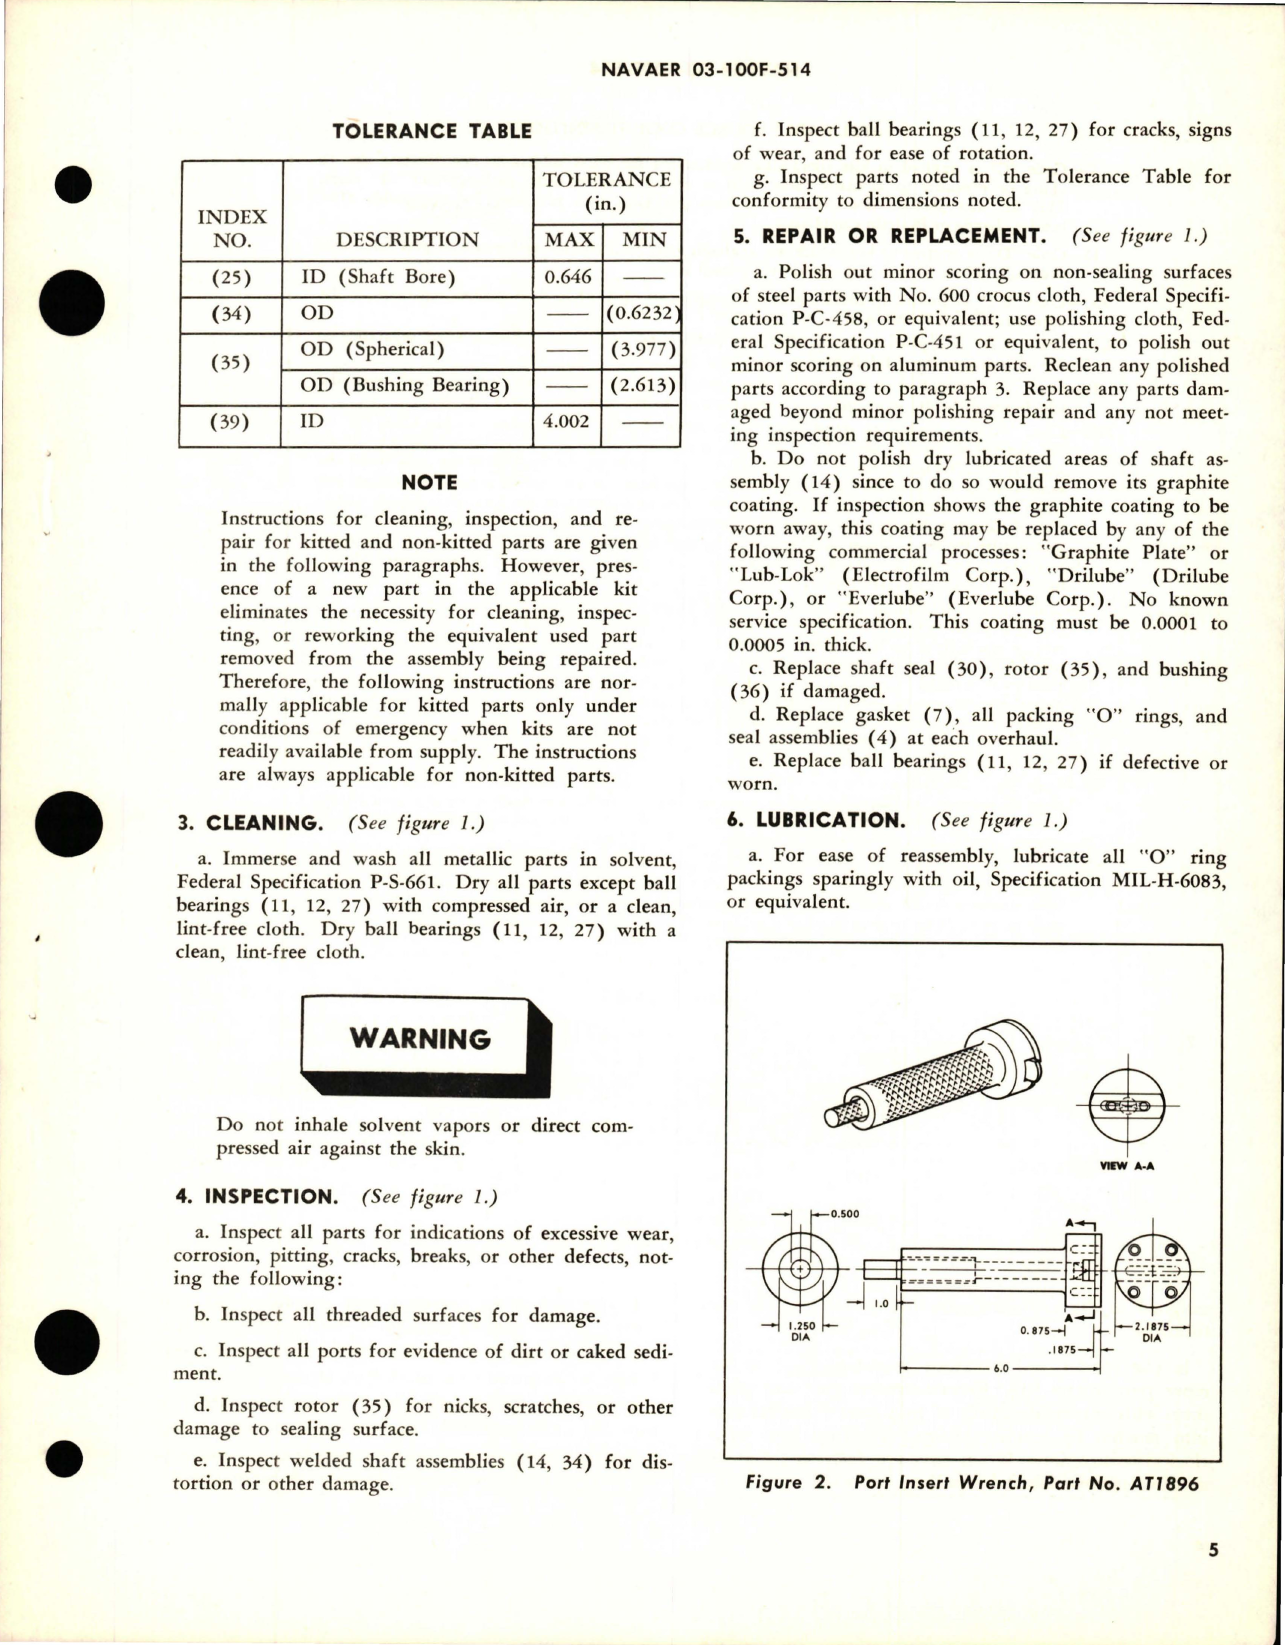 Sample page 5 from AirCorps Library document: Overhaul Instructions with Parts Breakdown for Manually Operated Rotary Shut-Off Valve Assemblies - Parts 131835 and 131835-2